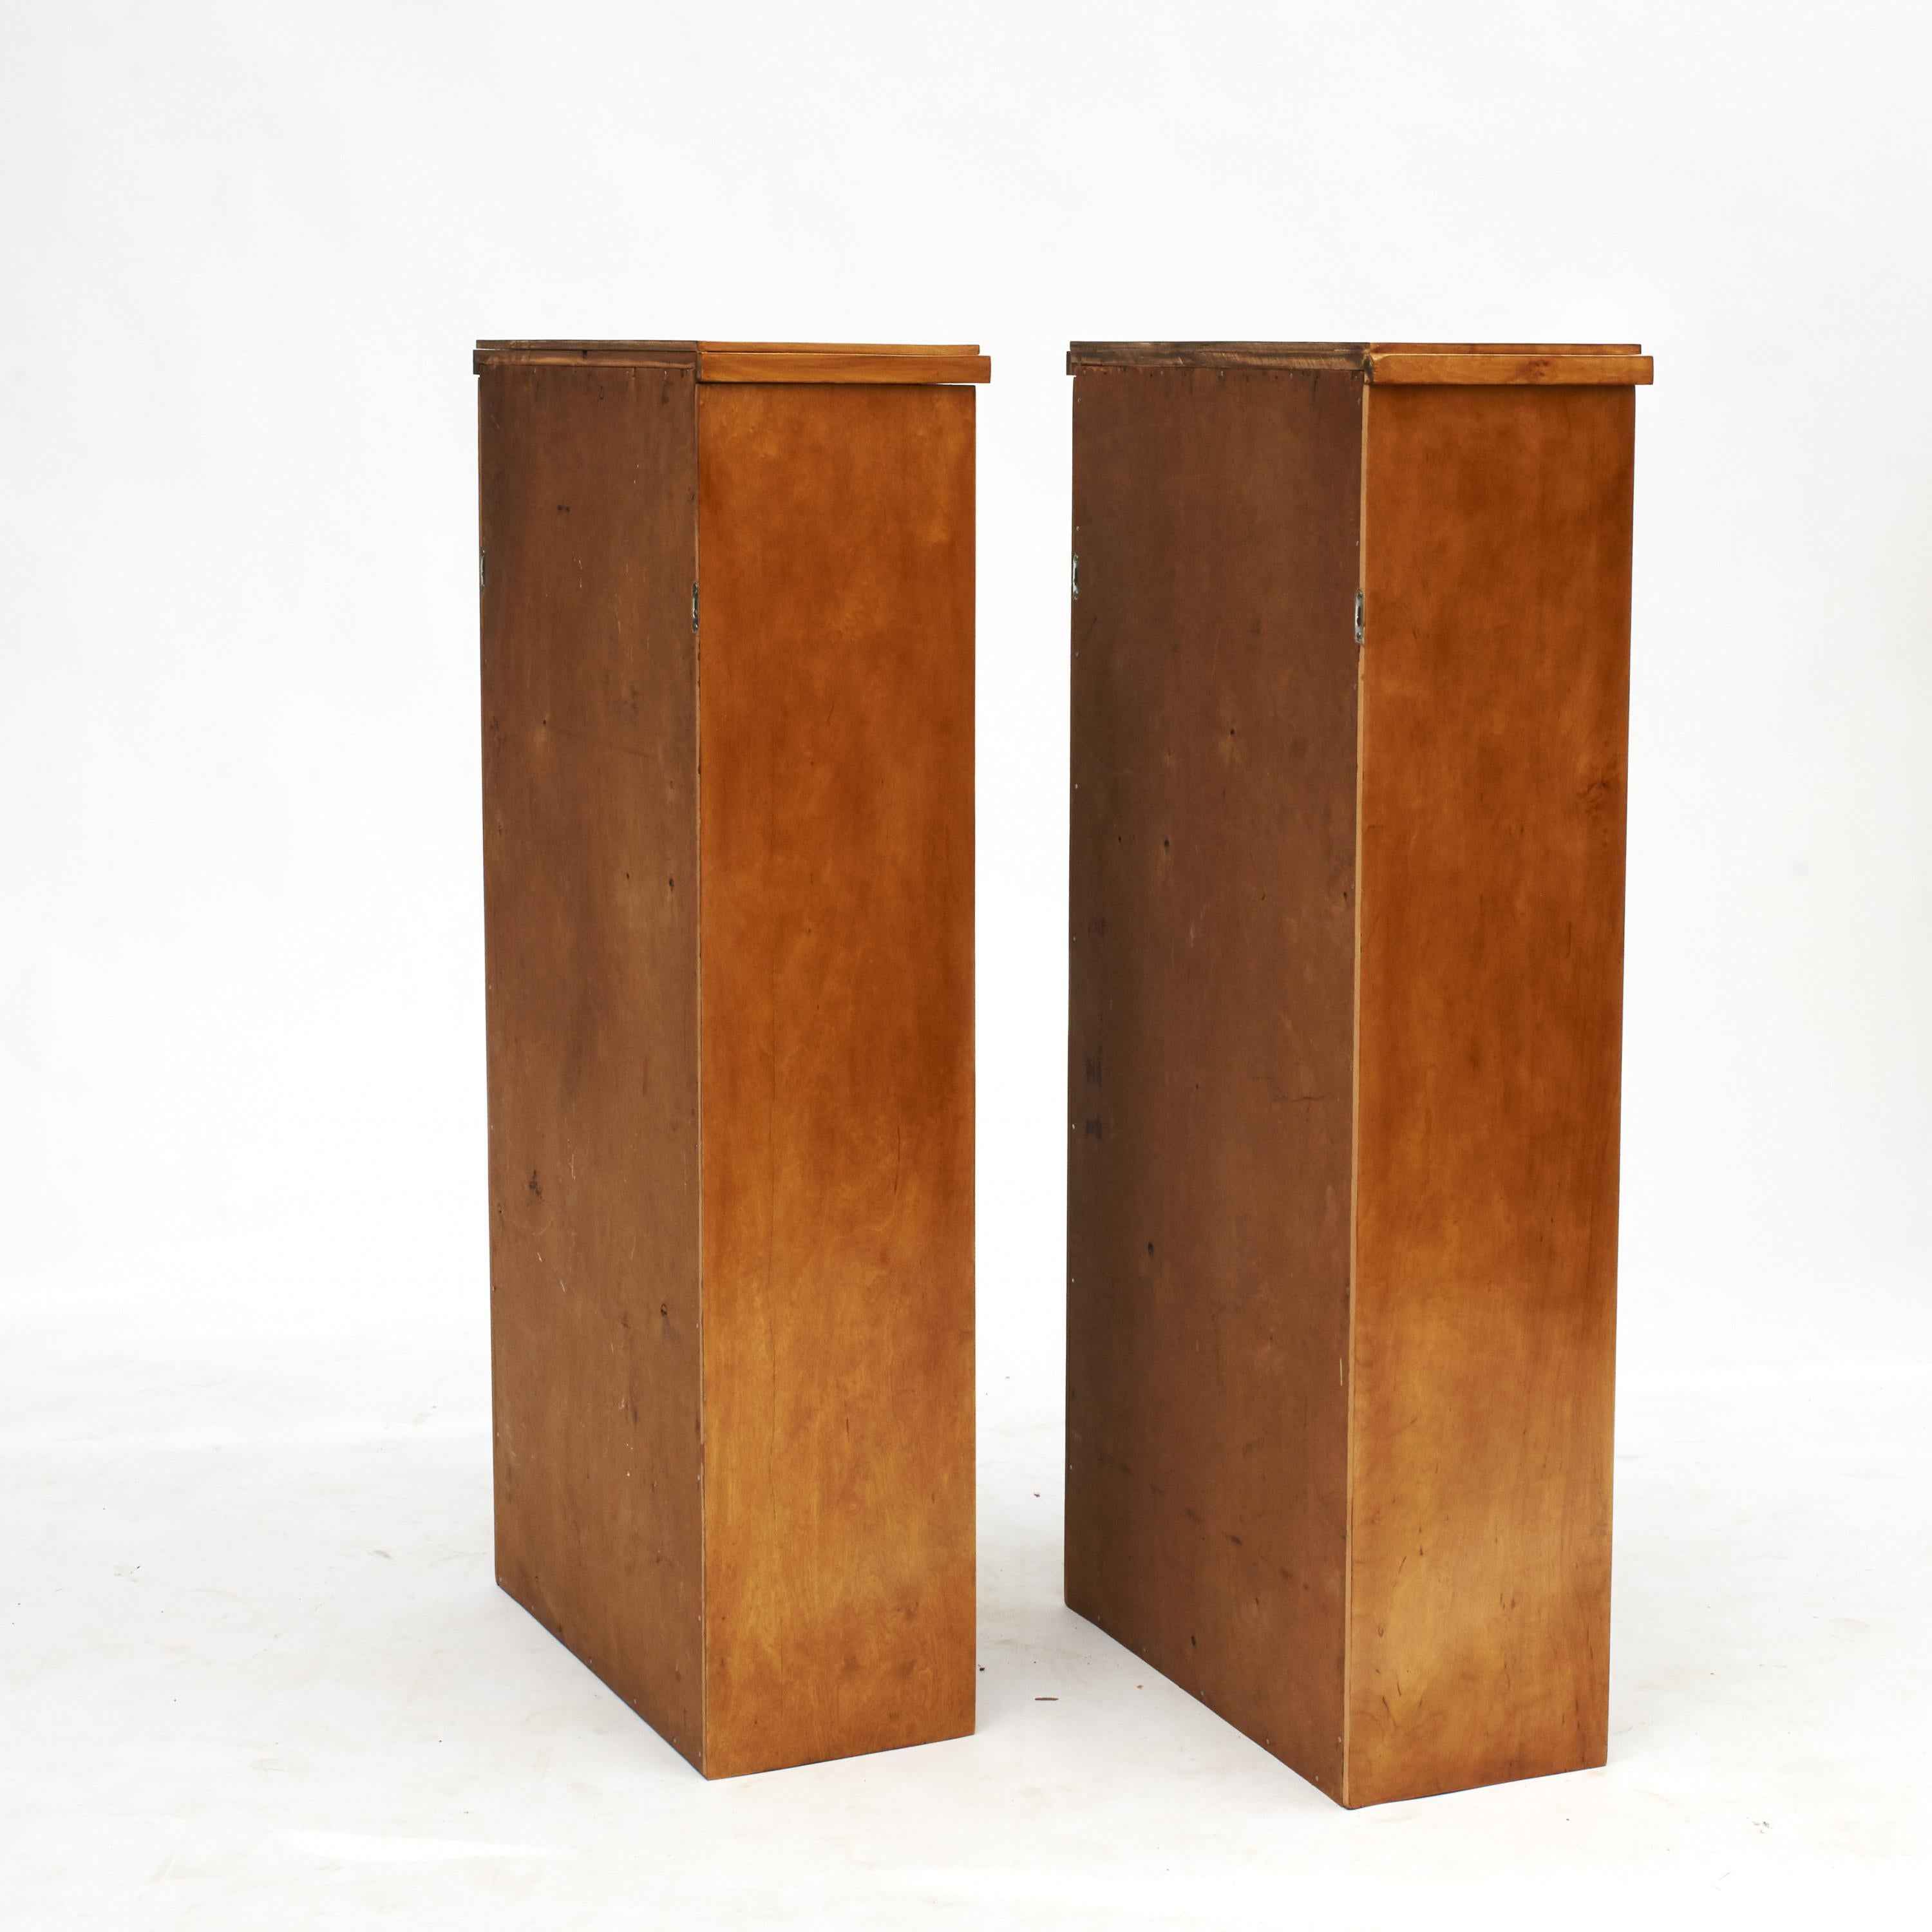 20th Century Pair of Art Deco Hanging Wall Cabinets